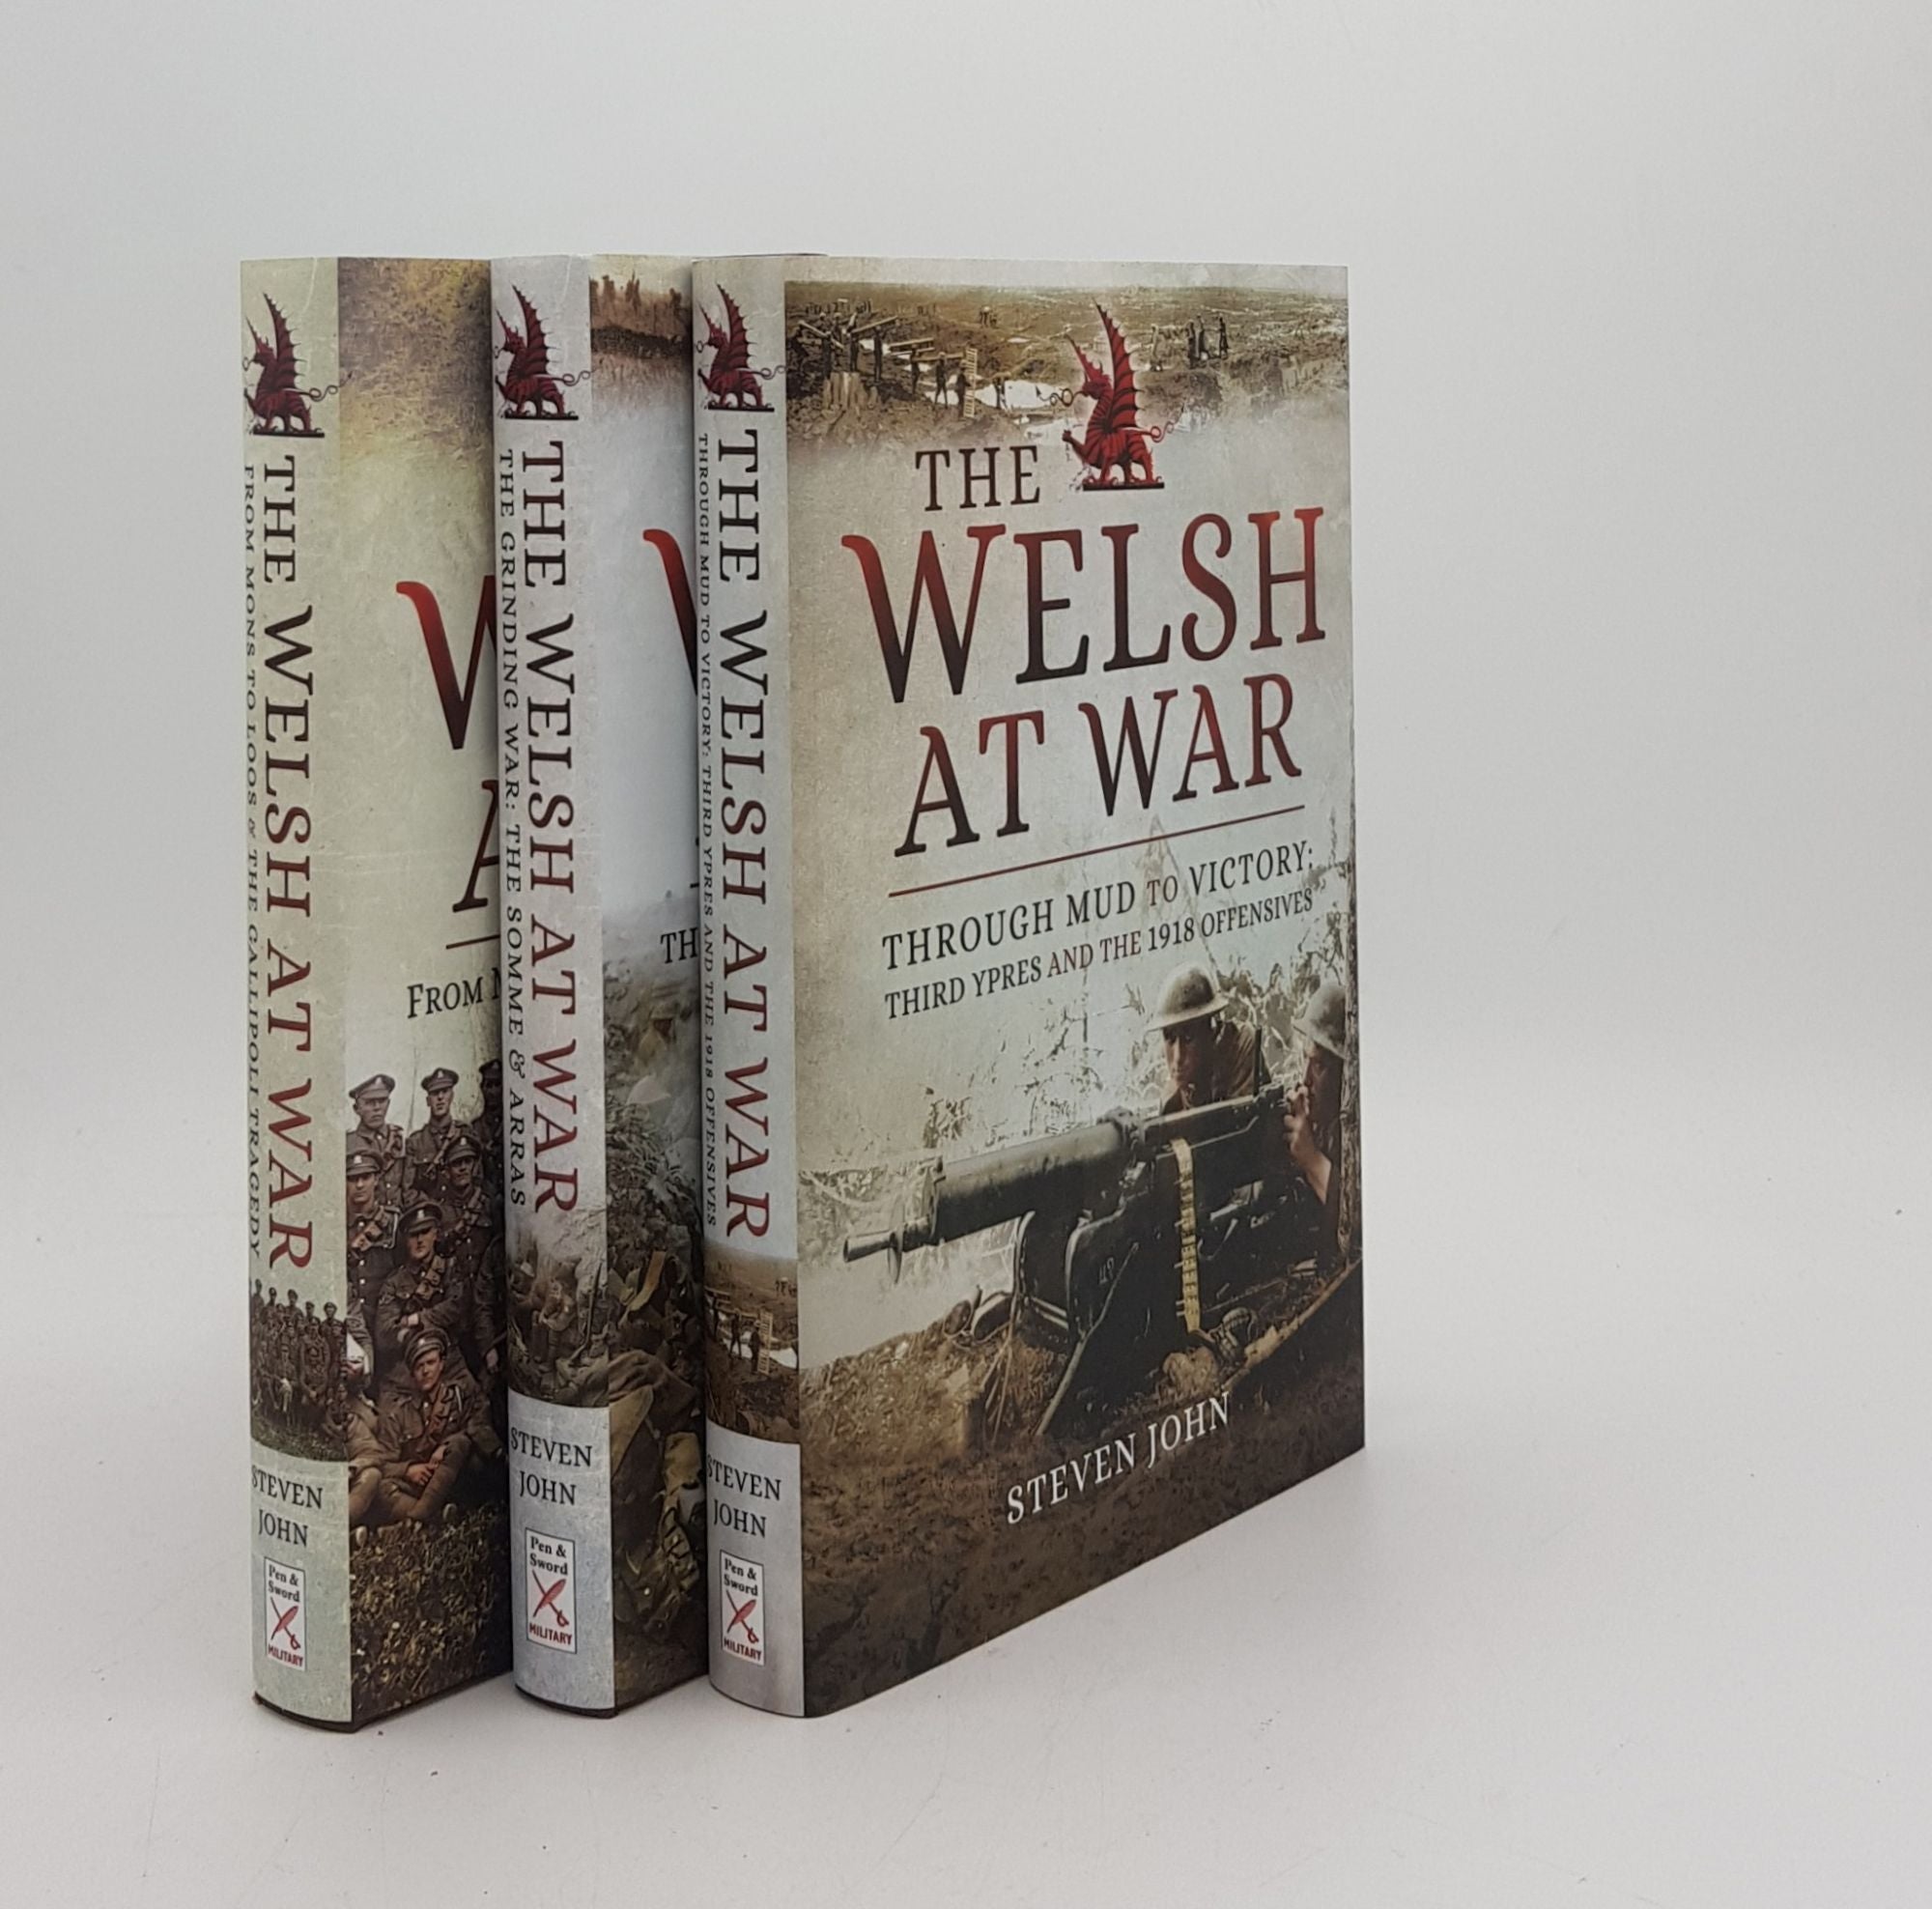 JOHN Steven - The Welsh at War Trilogy from Mons to Loos and the Gallipoli Tragedy, the Grinding War the Somme and Arras, Through Mud to Victory Third Ypres and the 1918 Offensives